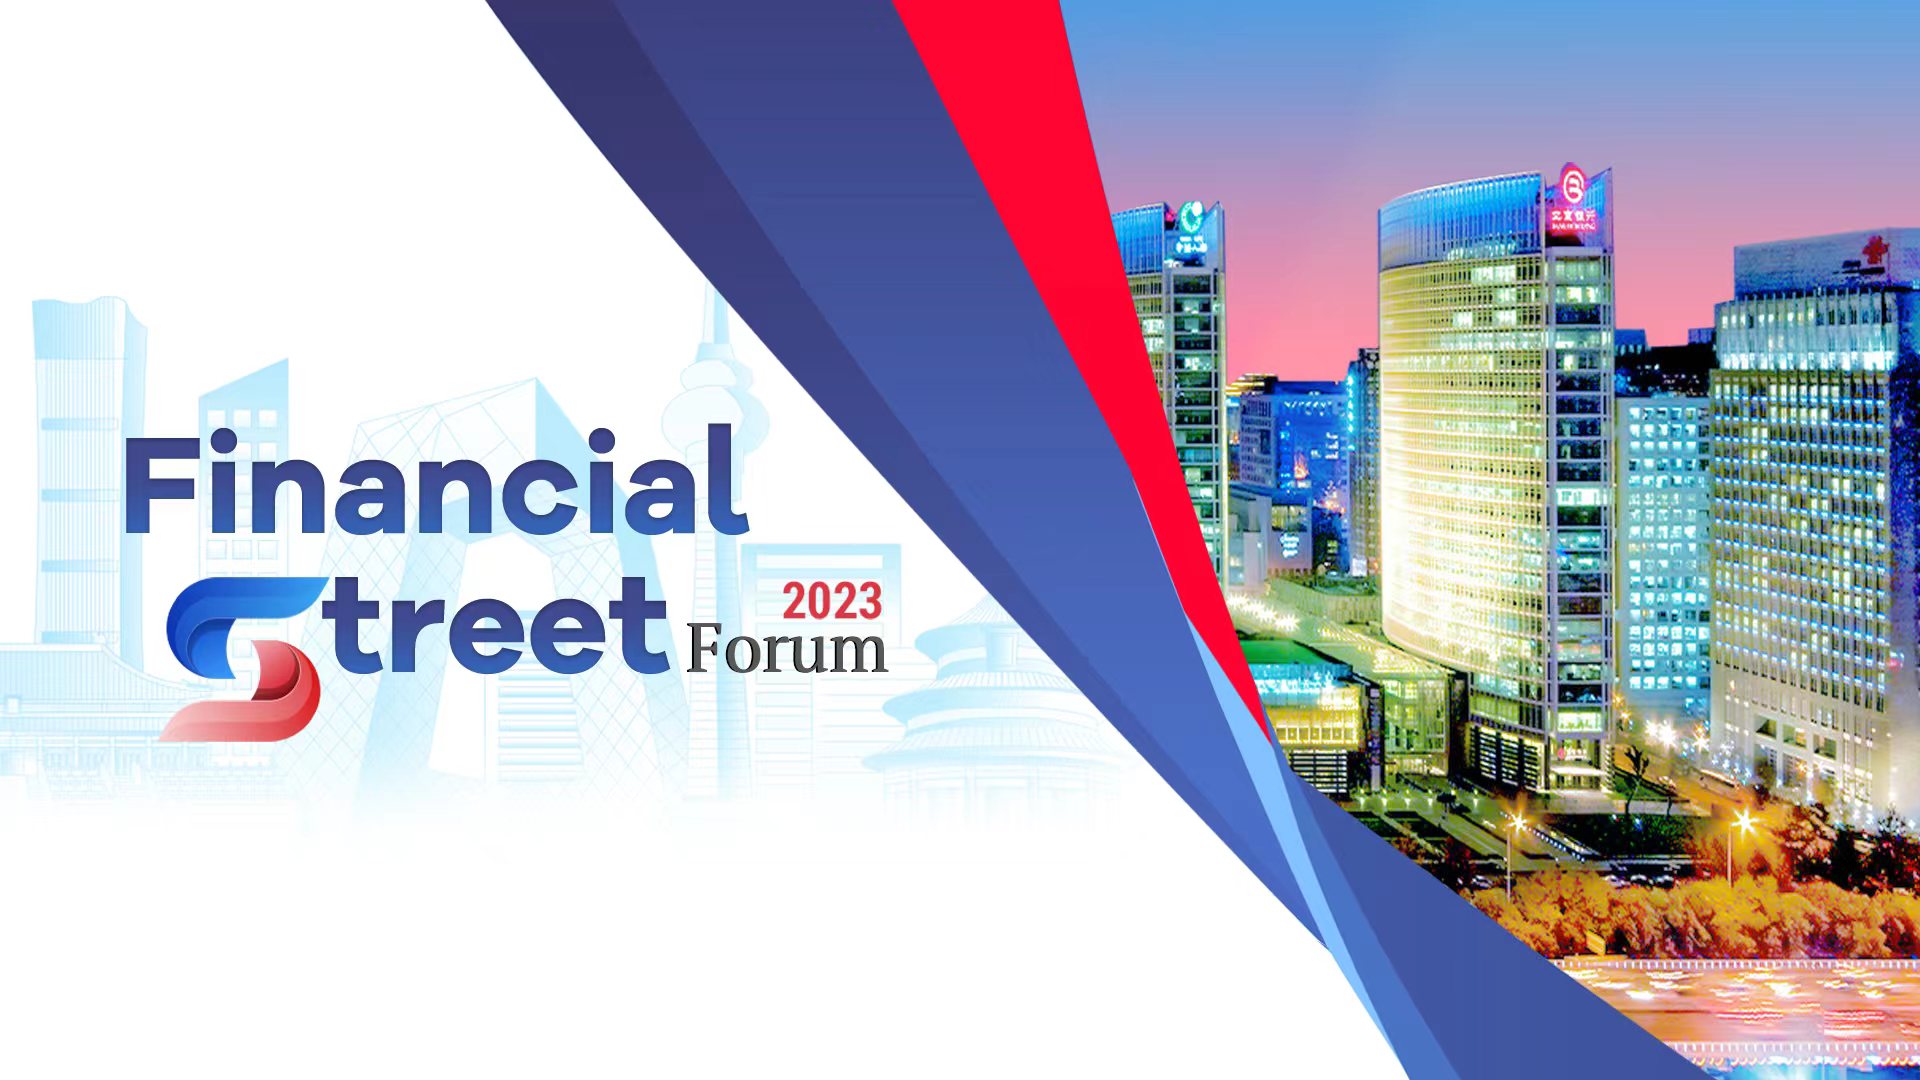 Live: The first main conference of 2023 Financial Street Forum kicks off in Beijing